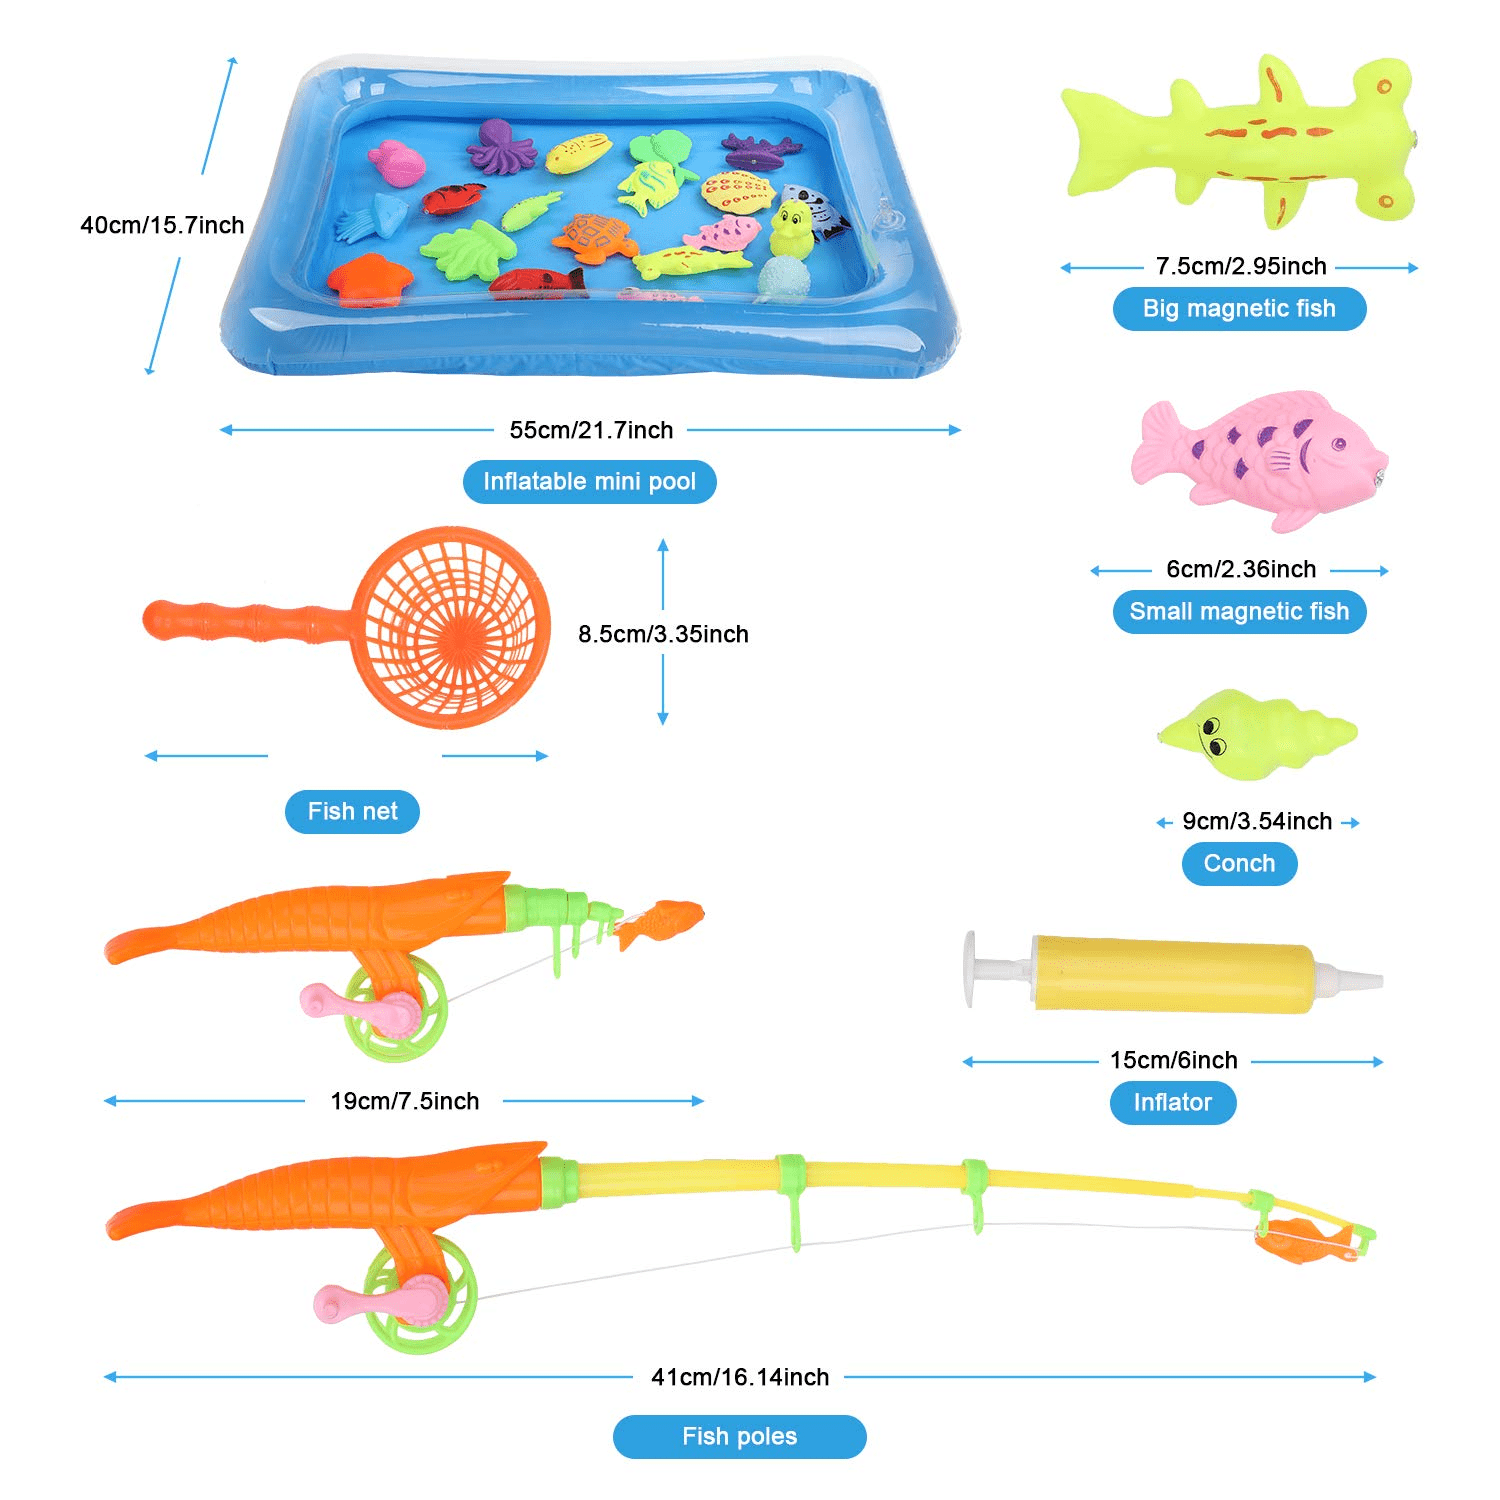 Powiller Magnetic Fishing Toy, 41 PCS Waterproof Magnet Fishing Game  Educational Bath Toy Play Set, Great Gift for Toddlers Kids with Fishes, 2 Pole  Rods, 2 Nets, 1 Inflatable Pool and 1Inflator 